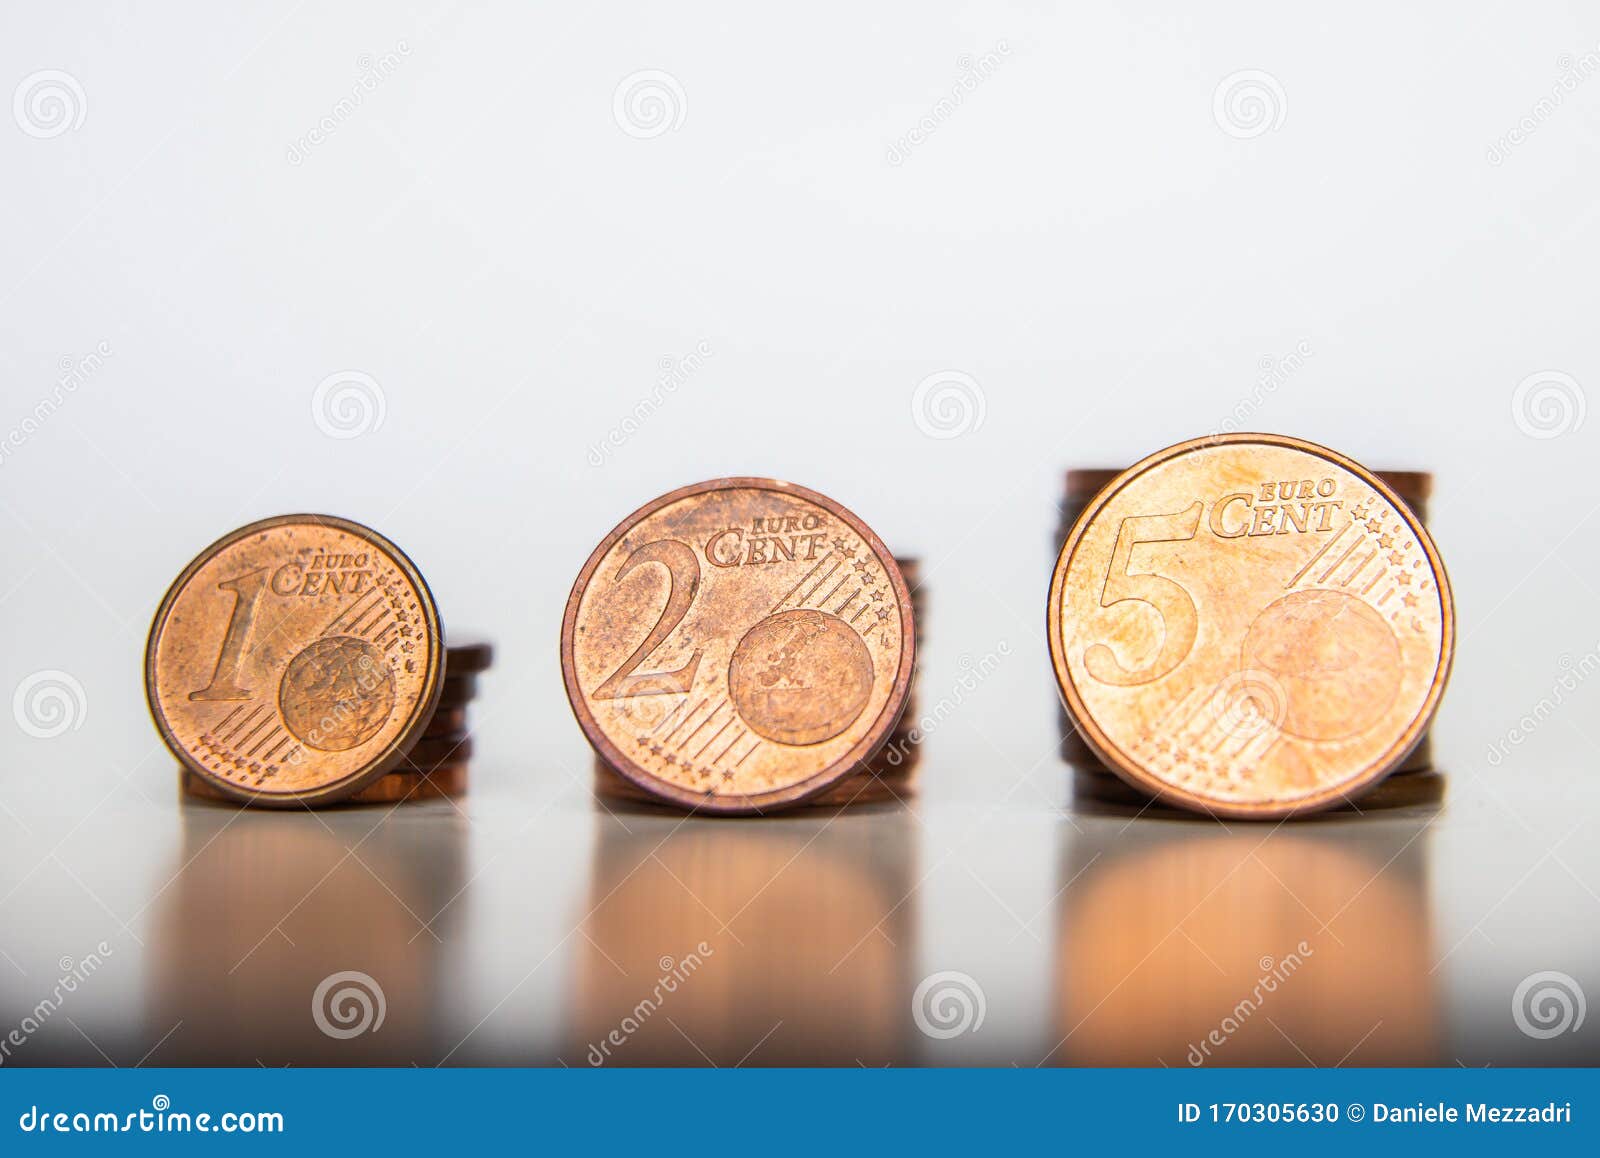 euro coins on a white backgronund